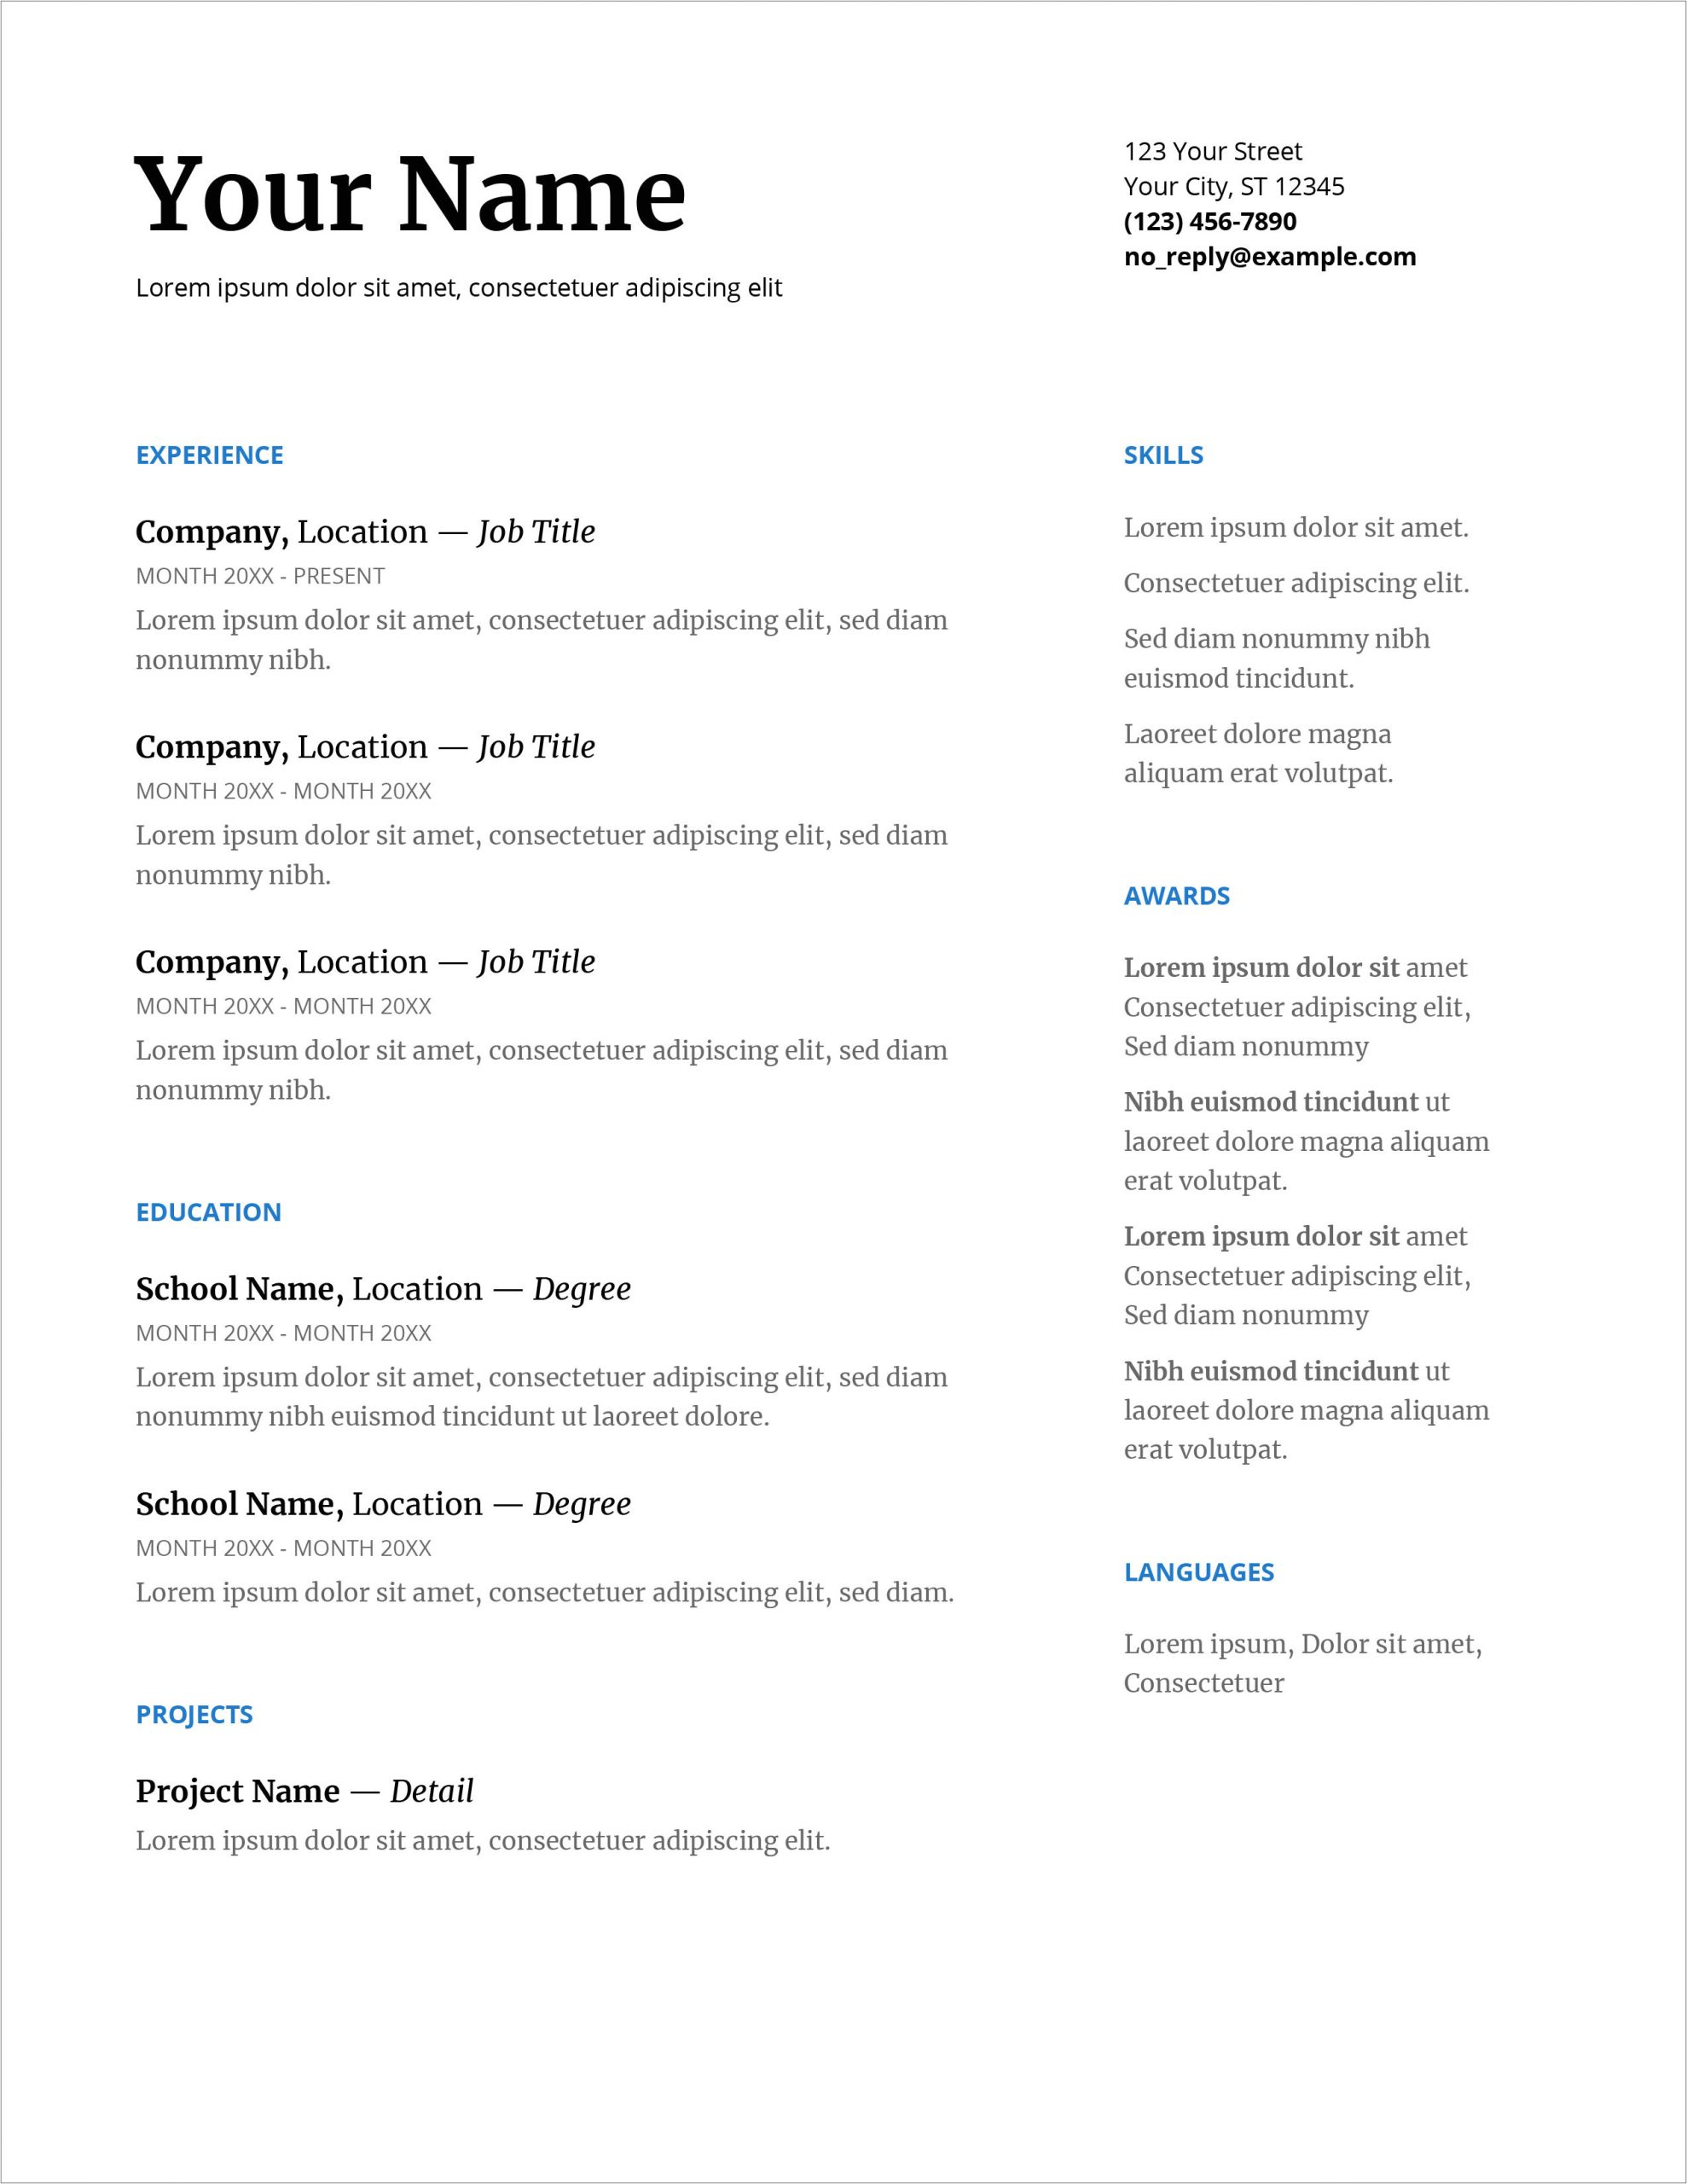 download free microsoft office resume sample and cv template